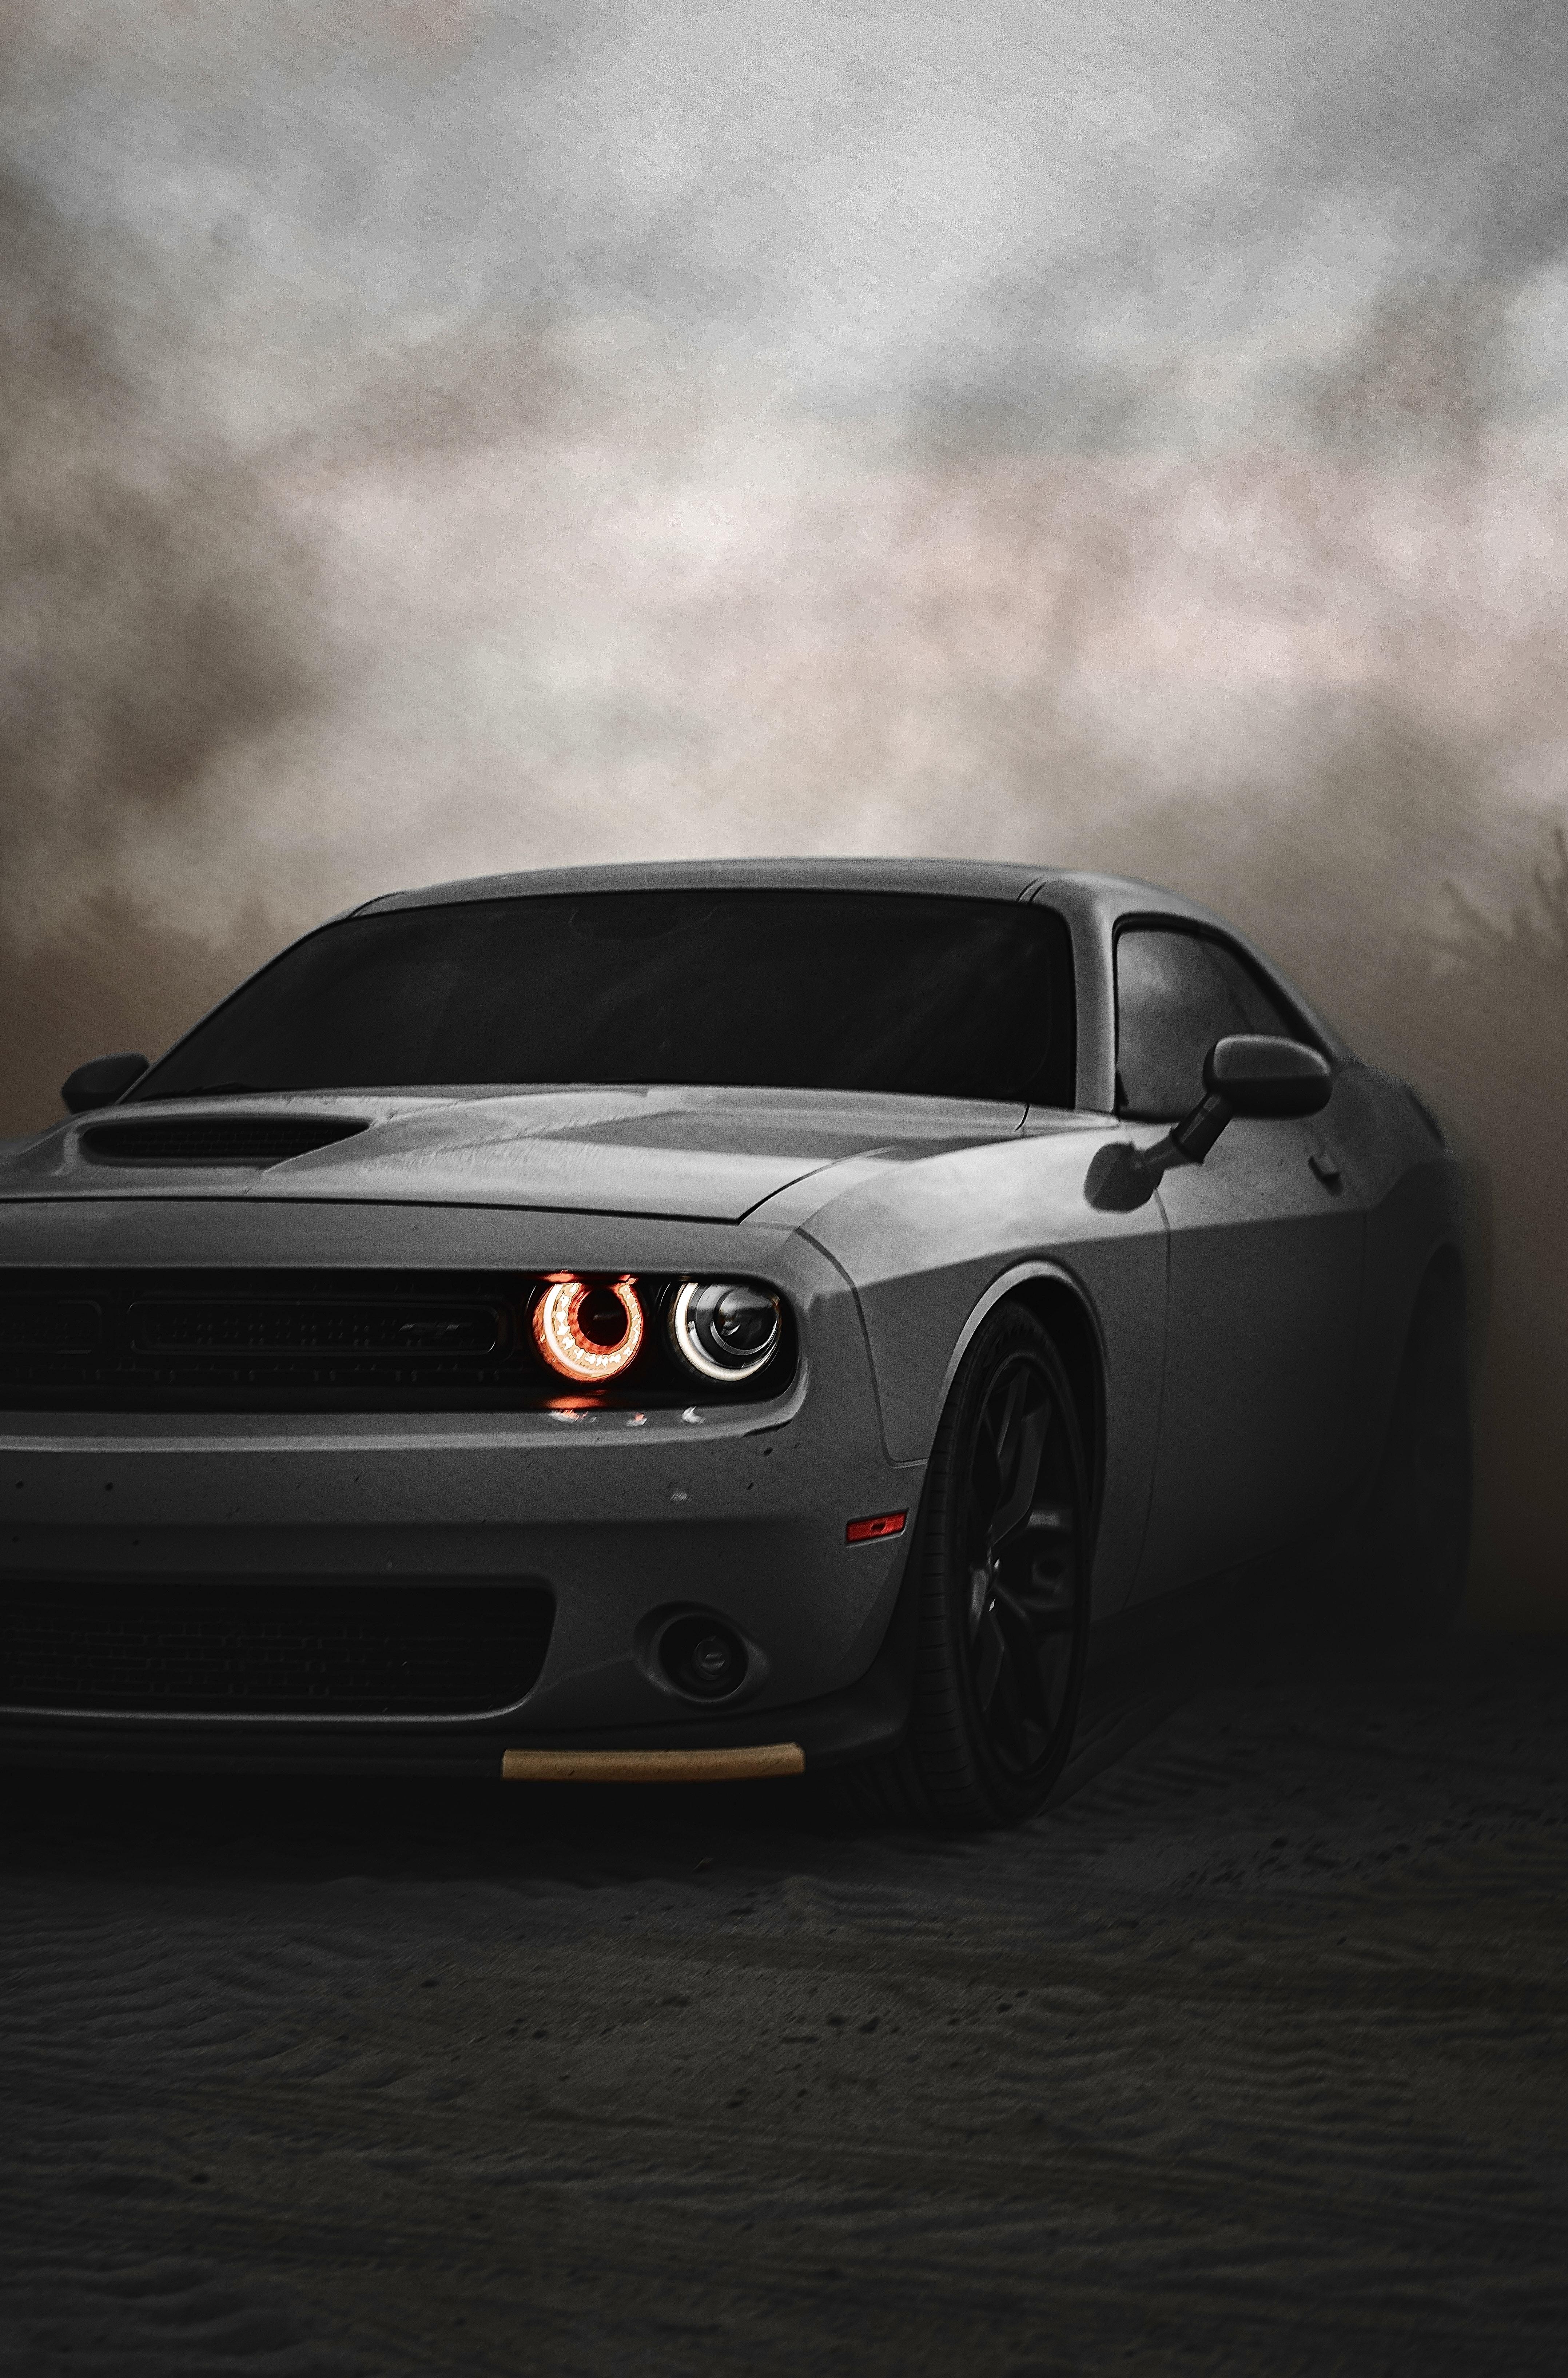 How much do you need to put down on a challenger? 